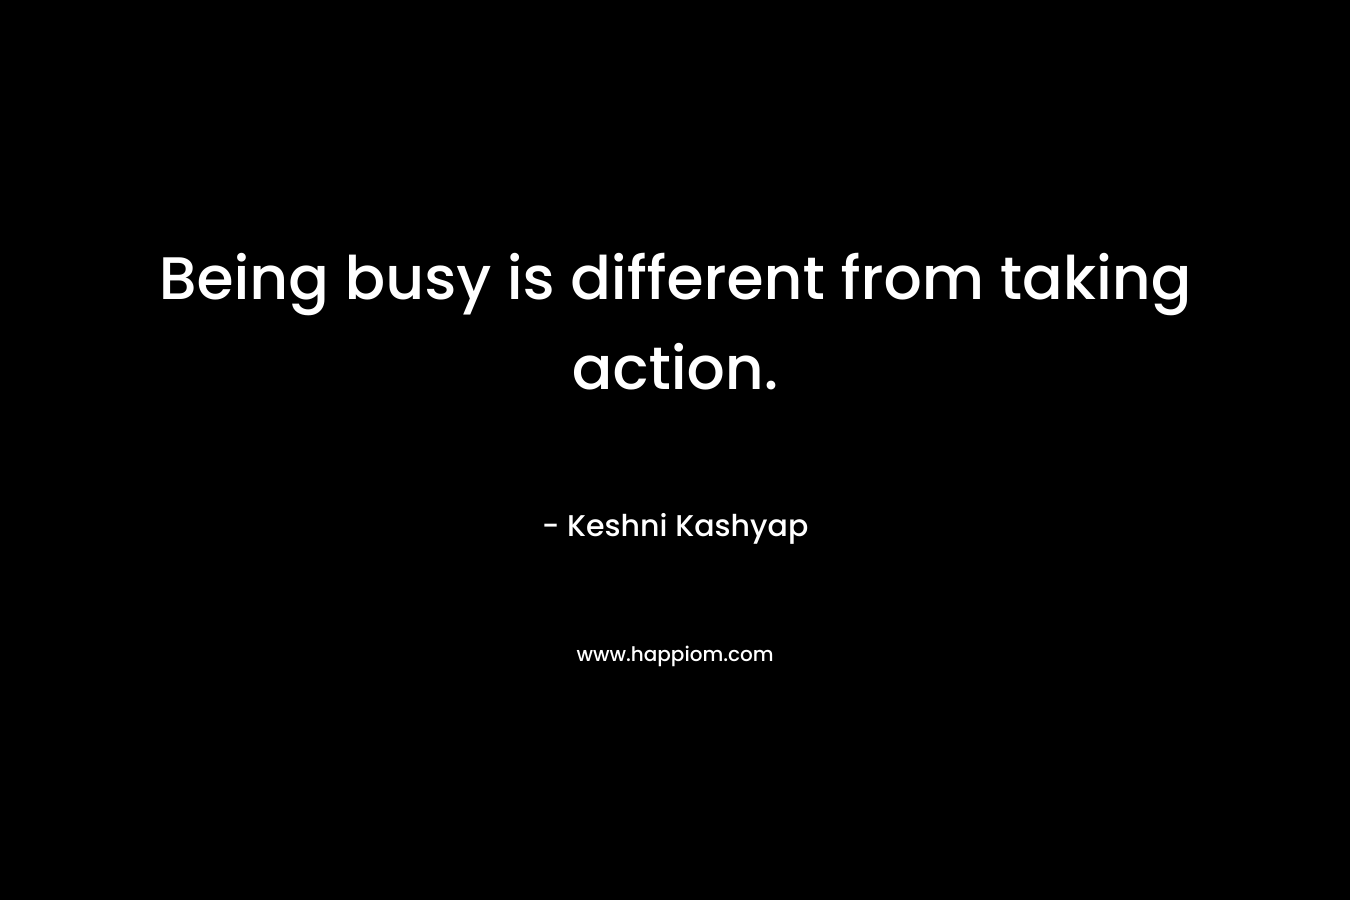 Being busy is different from taking action.